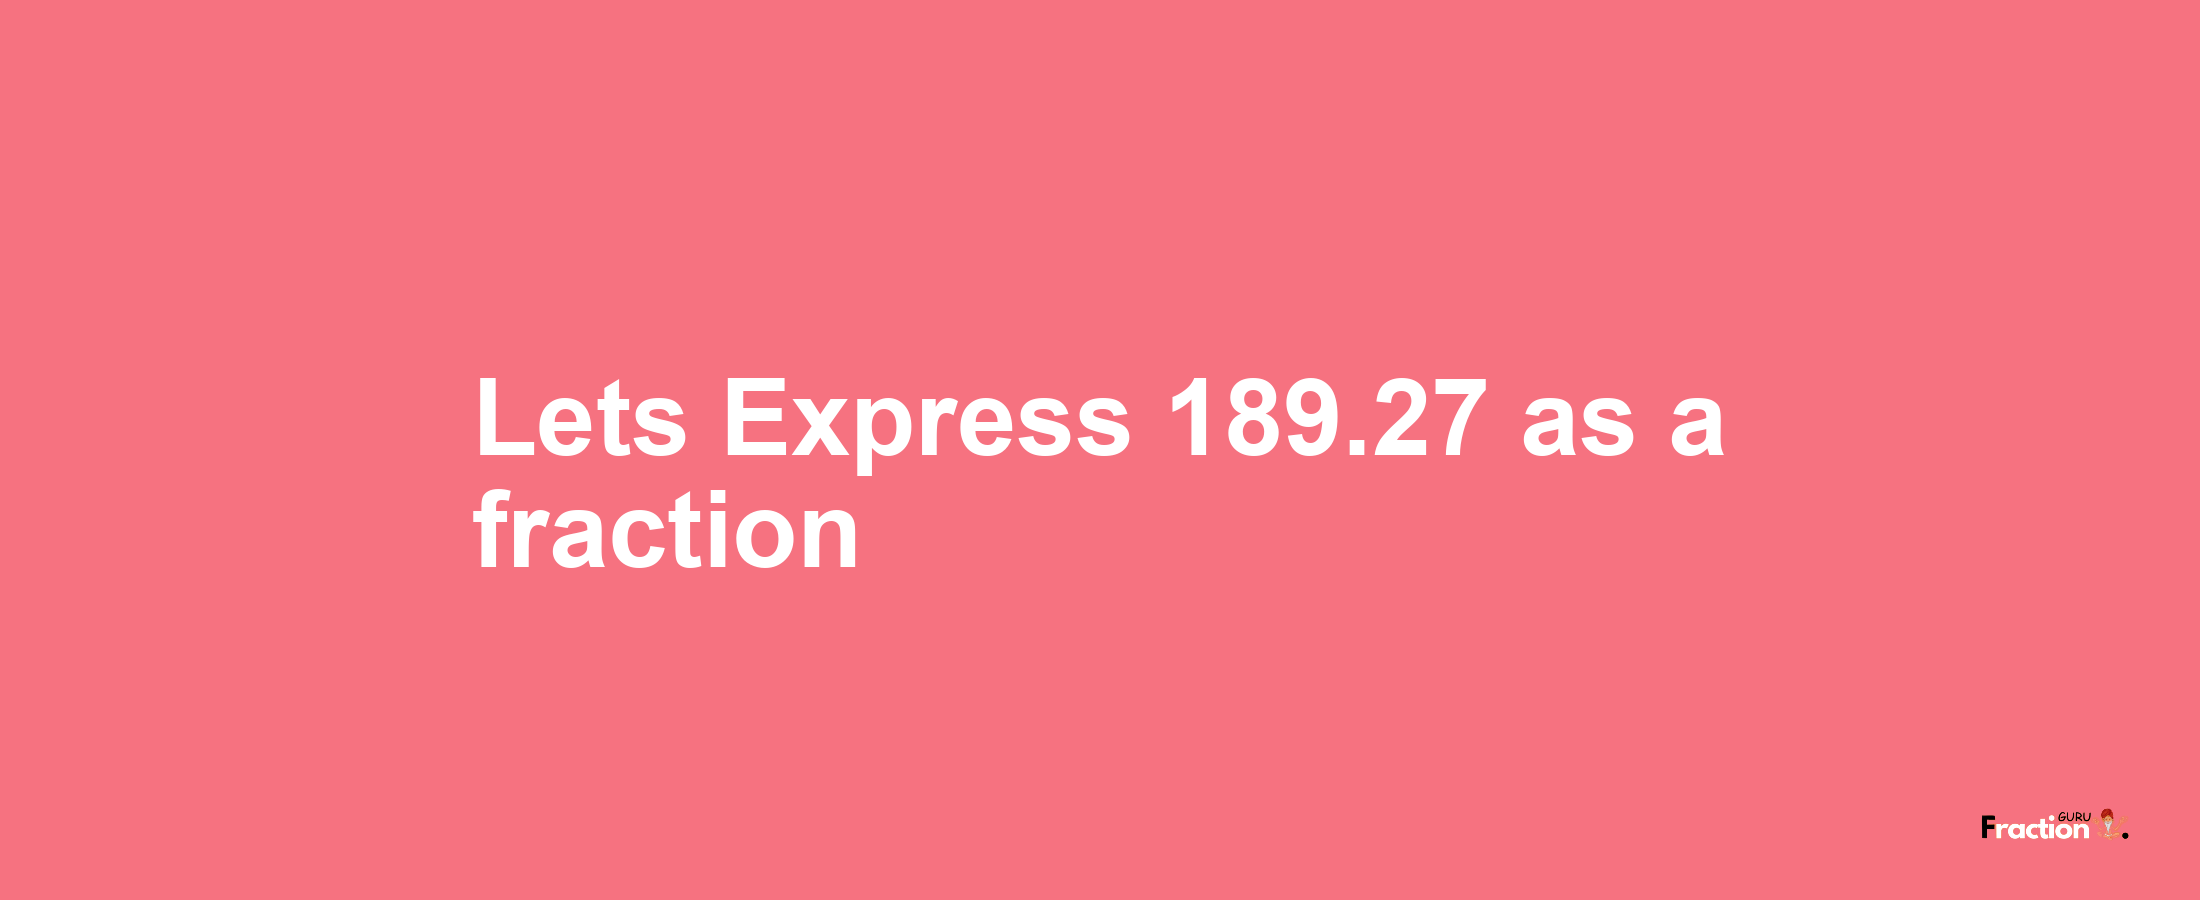 Lets Express 189.27 as afraction